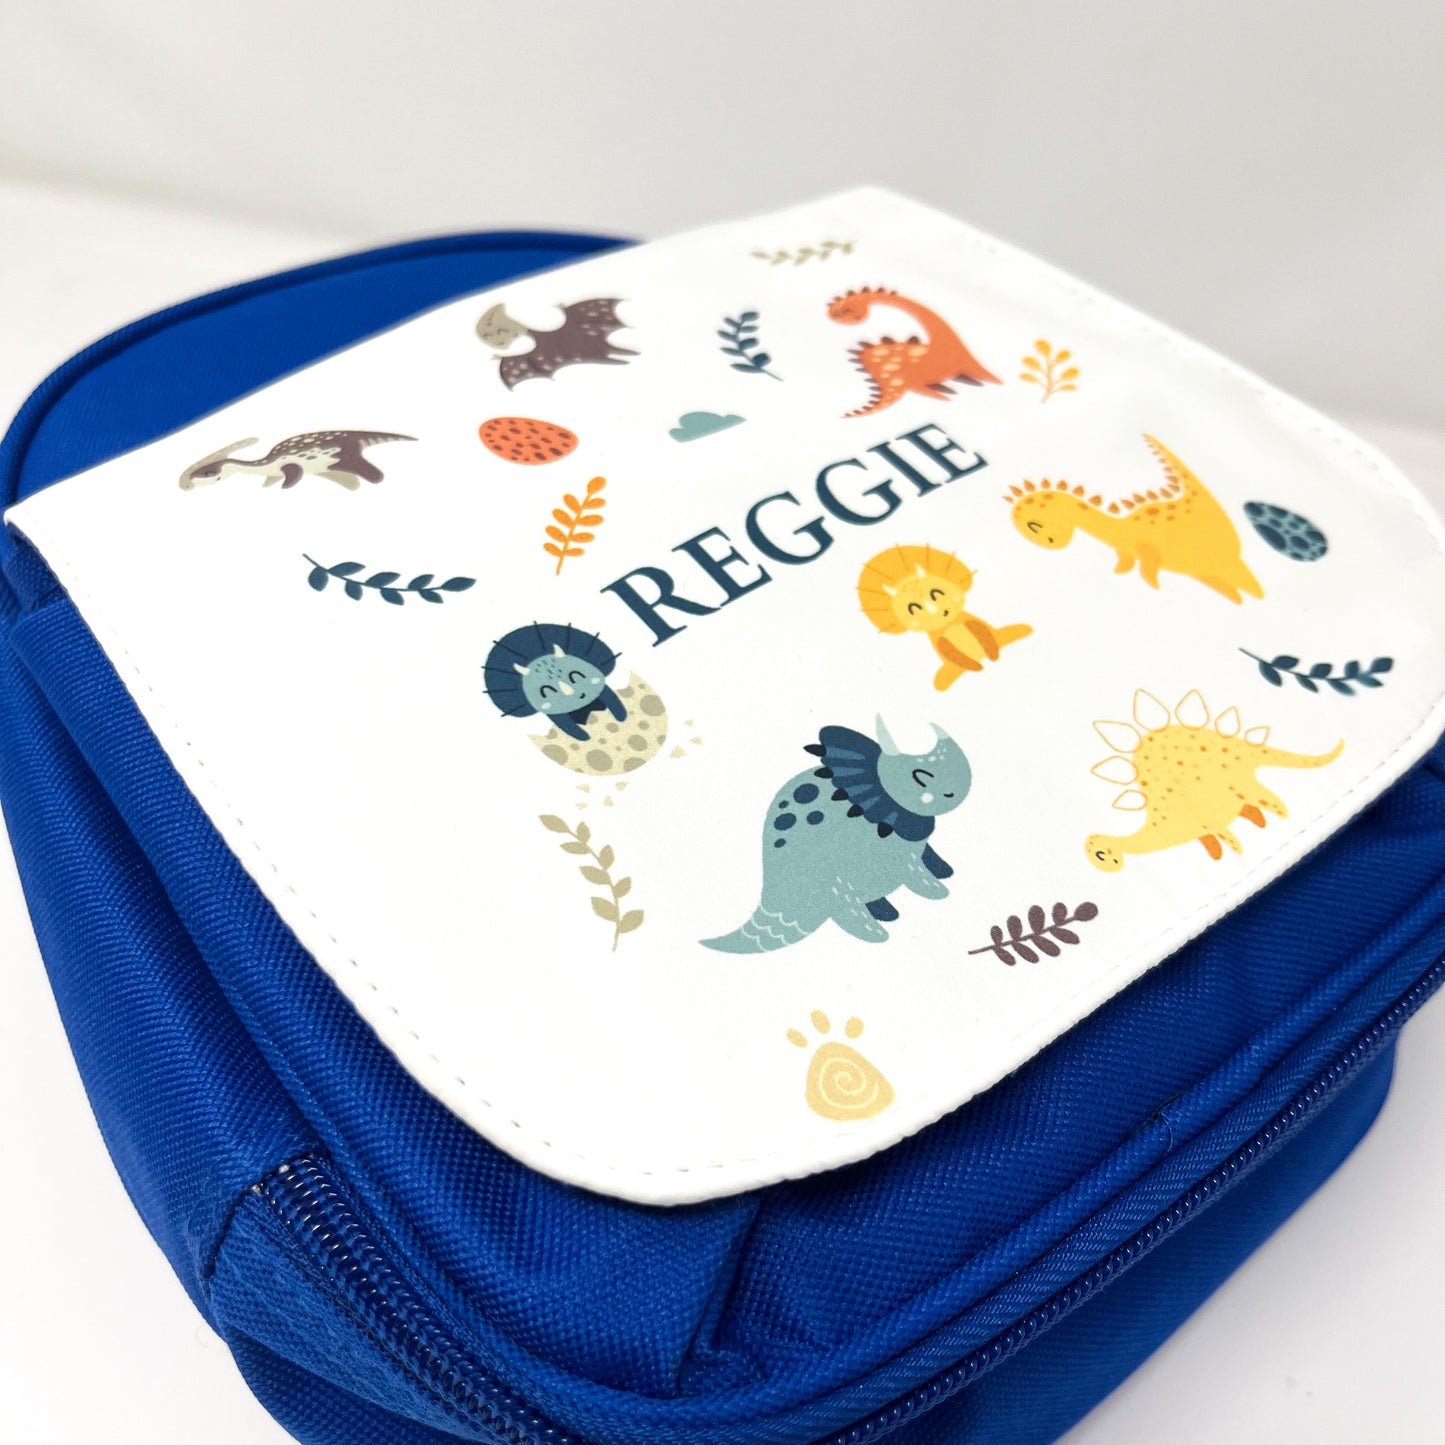 Children’s Personalised Lunch Bag and Box - Boho Dinosaur- Blue